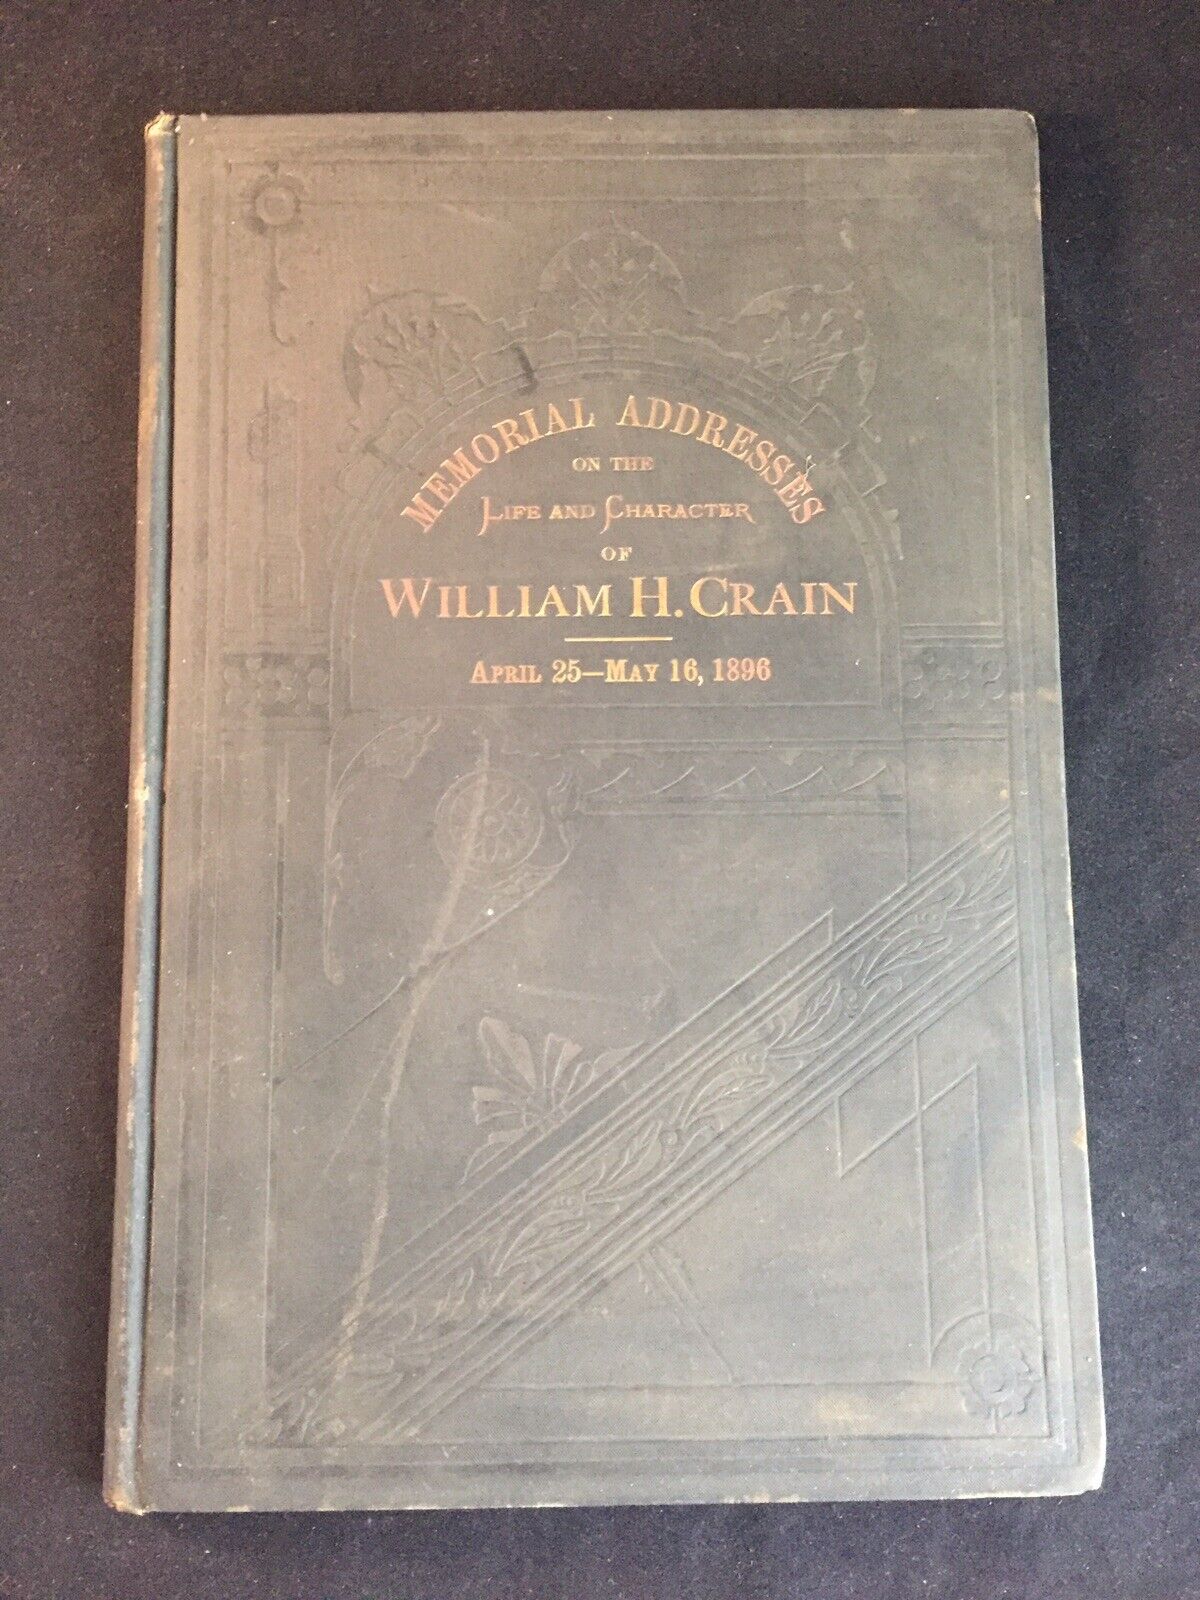 Vintage 1897 Memorial Addresses on the Life & Character of William H. Crain